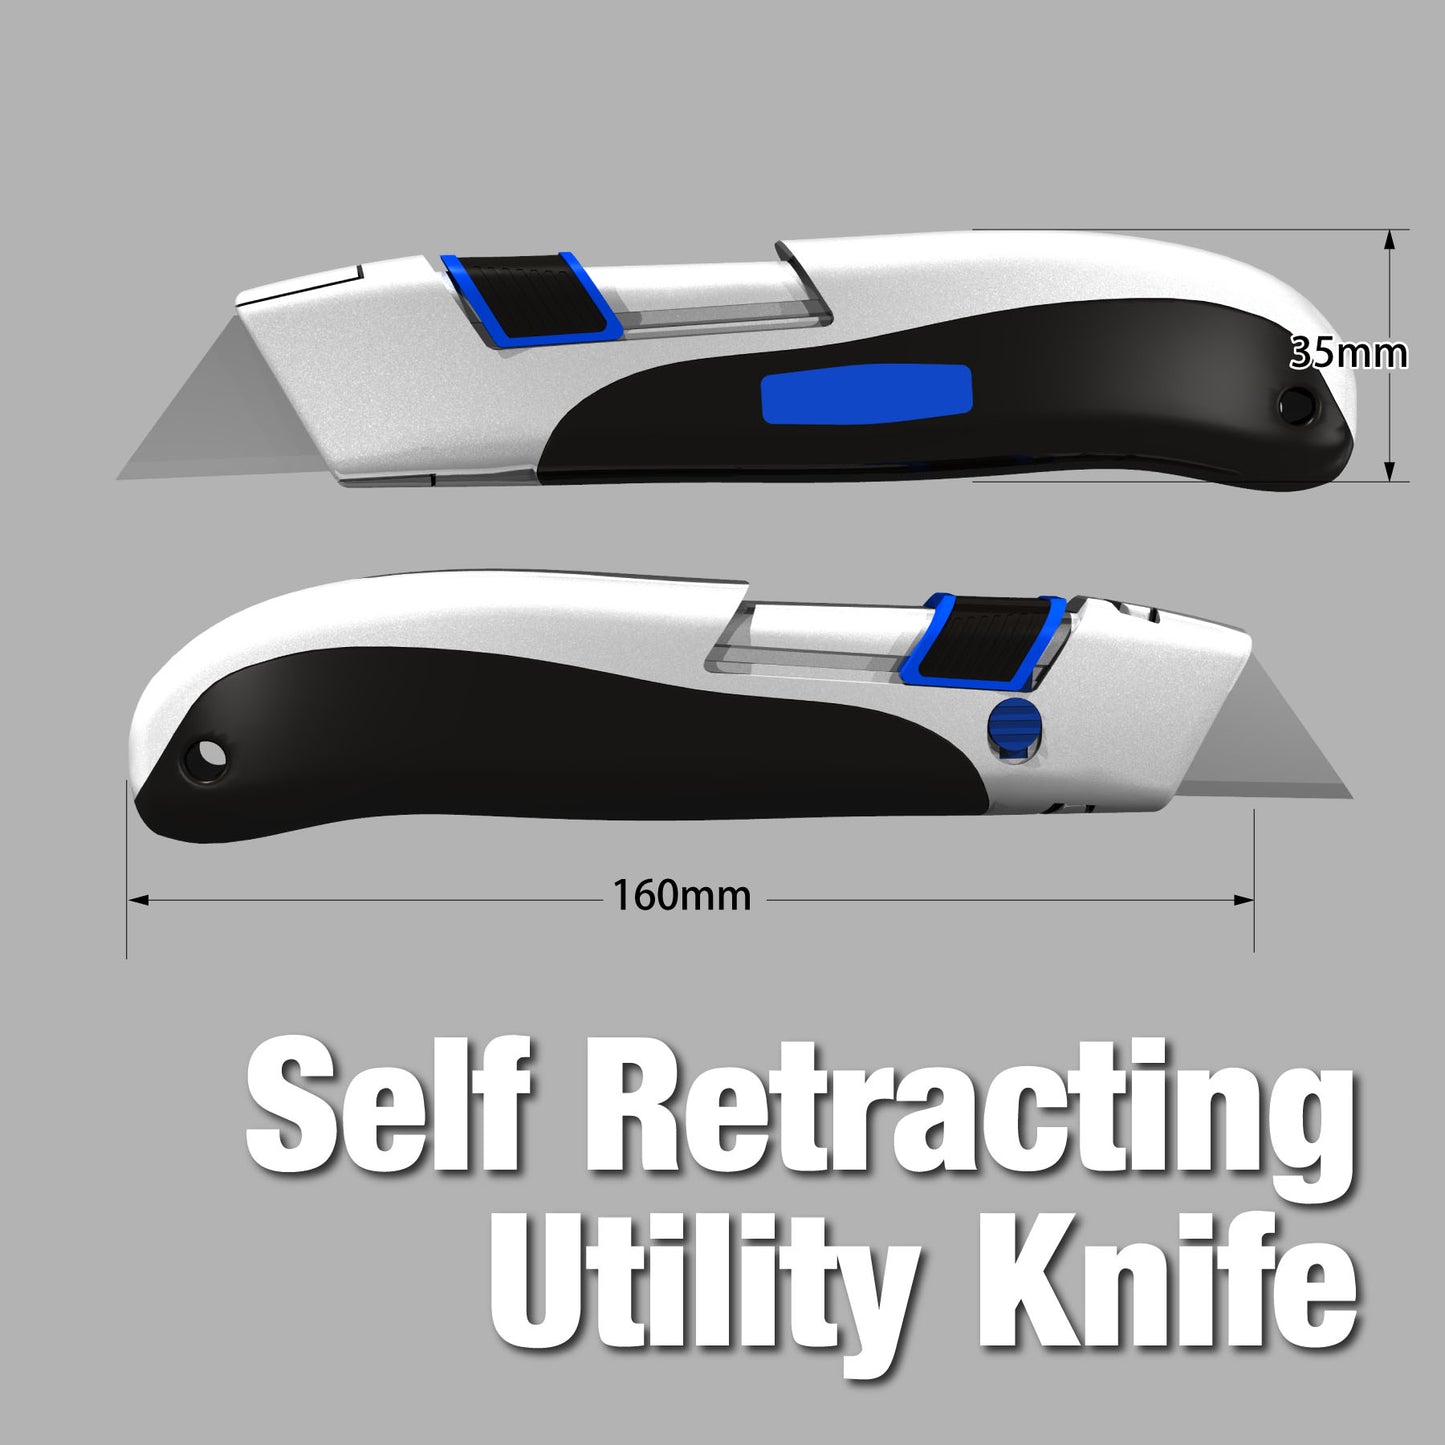 HAUTMEC Premium High Safety Utility Knife with Double Self-retraction Mechnism, Retractable Blade,Heavy Duty Box Cutter with Zinc Alloy Body, Tool-free Blade Change, HT0351-KN